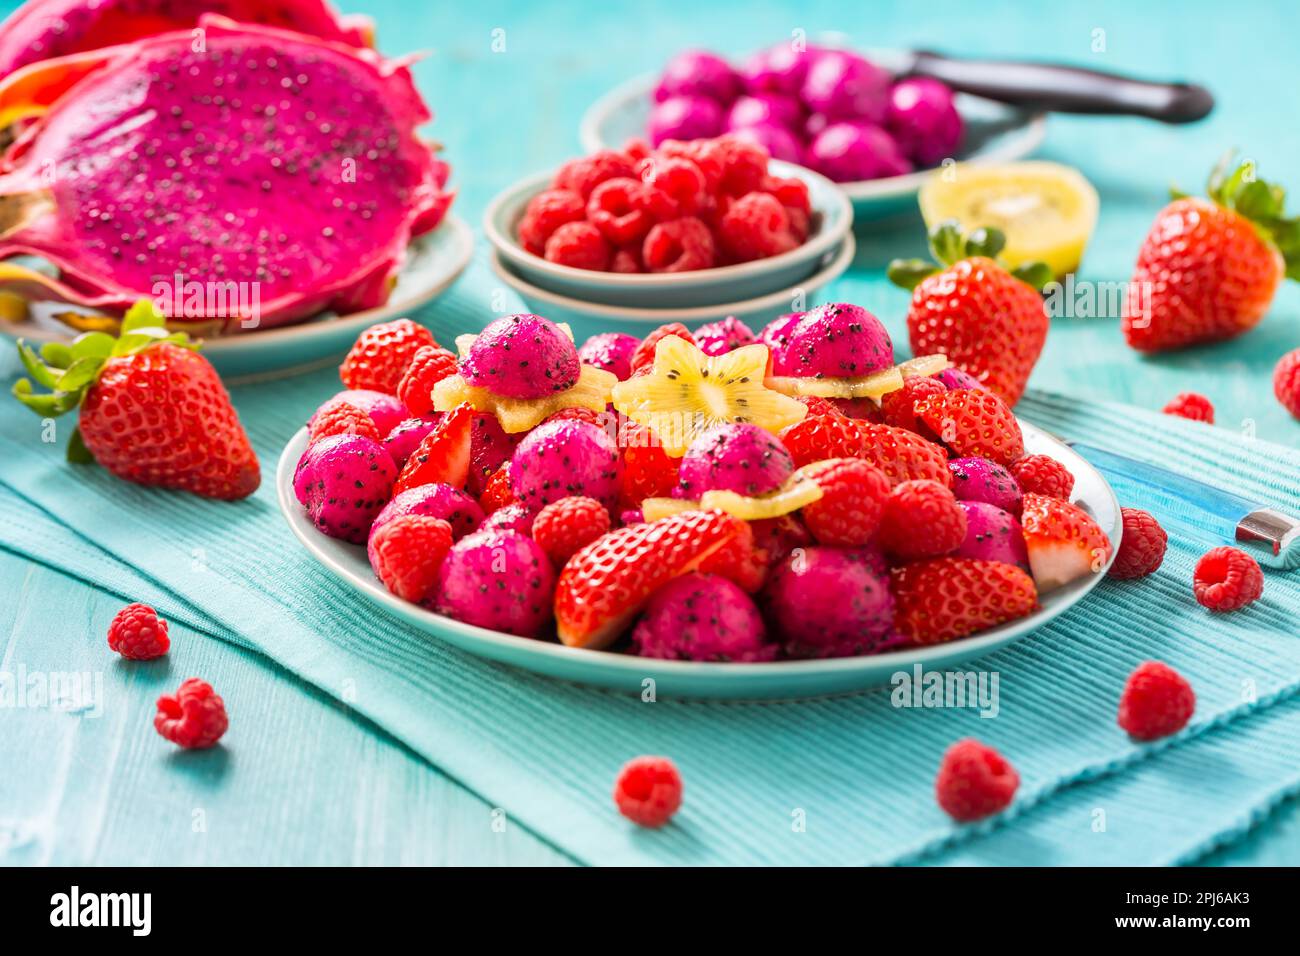 Fresh dragon fruit salad with strawberries, rspberries and start fruit (carambola) on cyan background Stock Photo